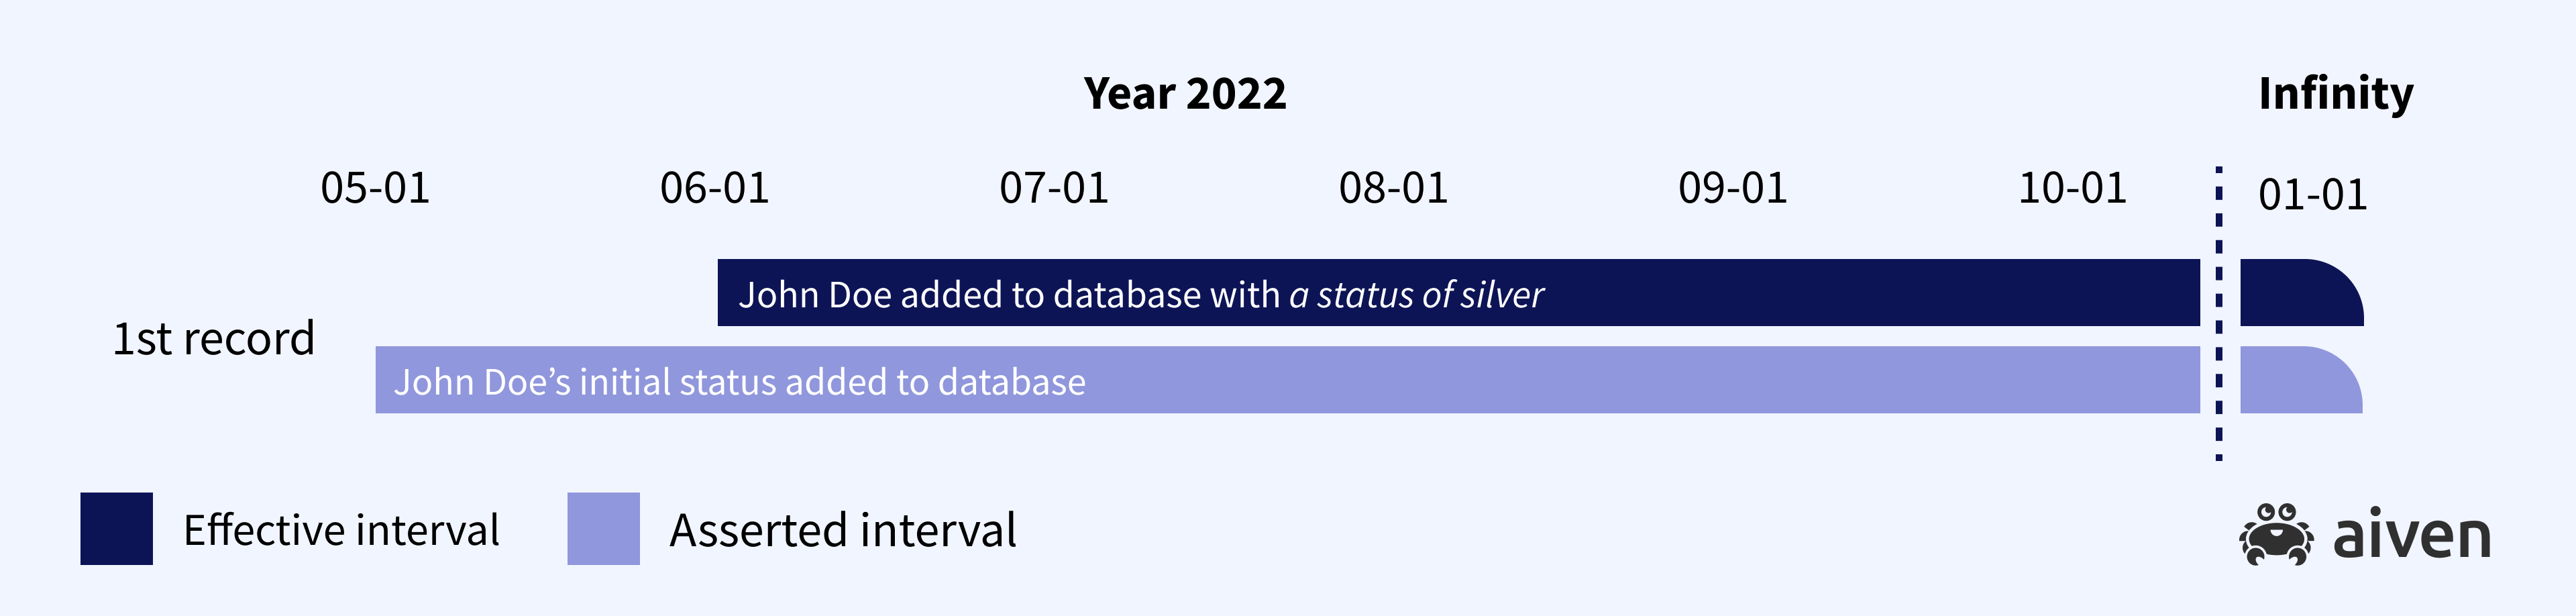 diagram showing John Doe added to the database on 05-01 and his status changed to silver on 06-01